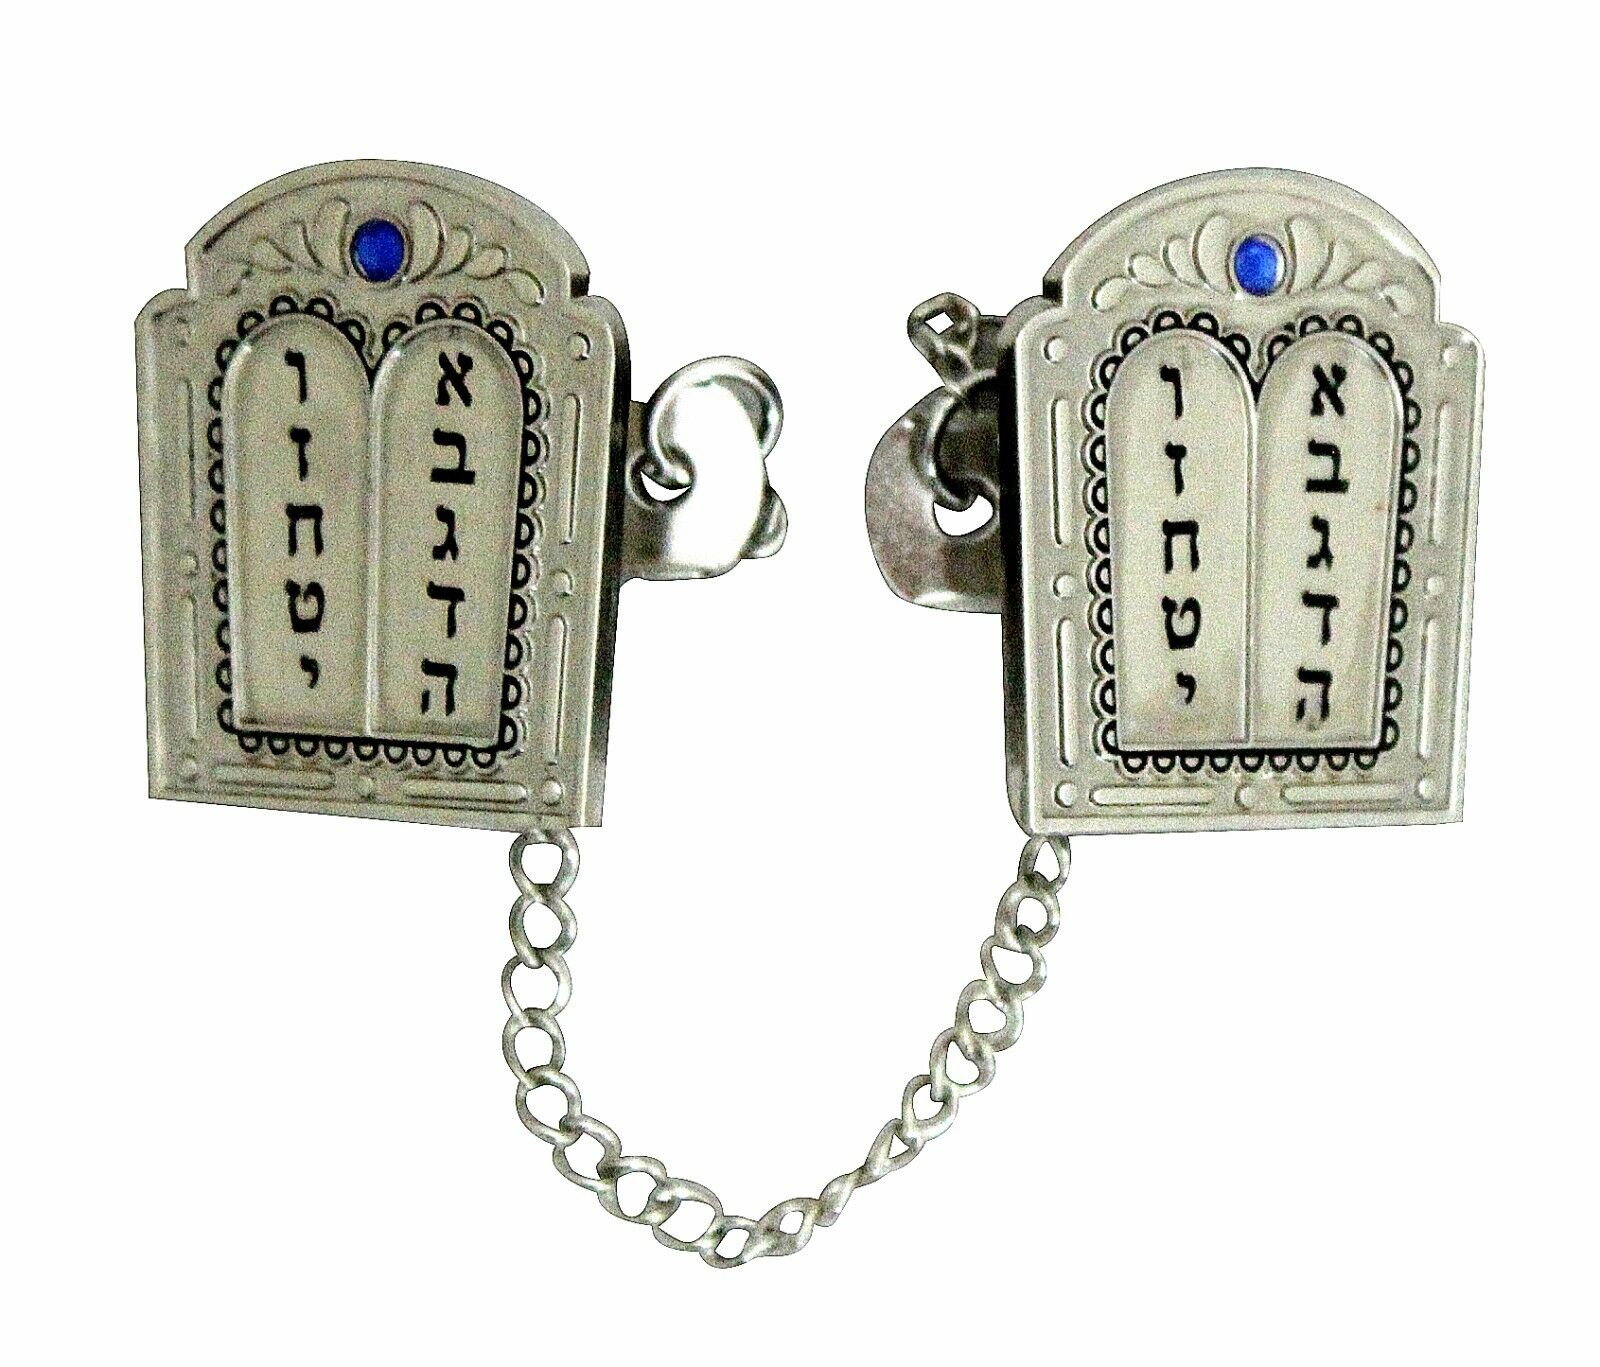 Tallit Talis Clips Prayer Shawl Luchot Habrit Tables of Covenant Inlaid Judaica